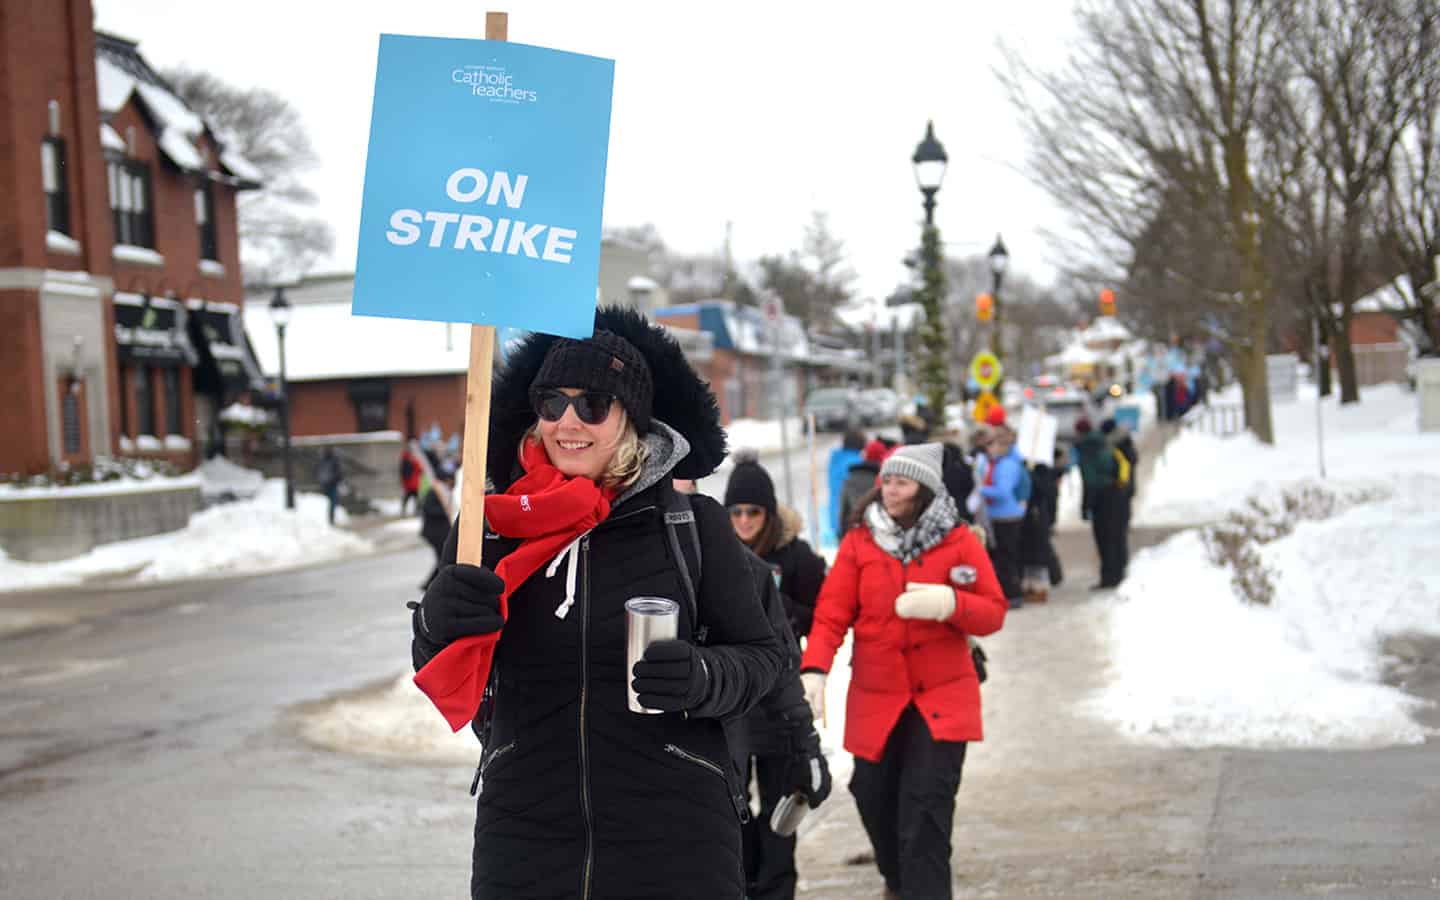 Catholic teachers join public board on the picket lines